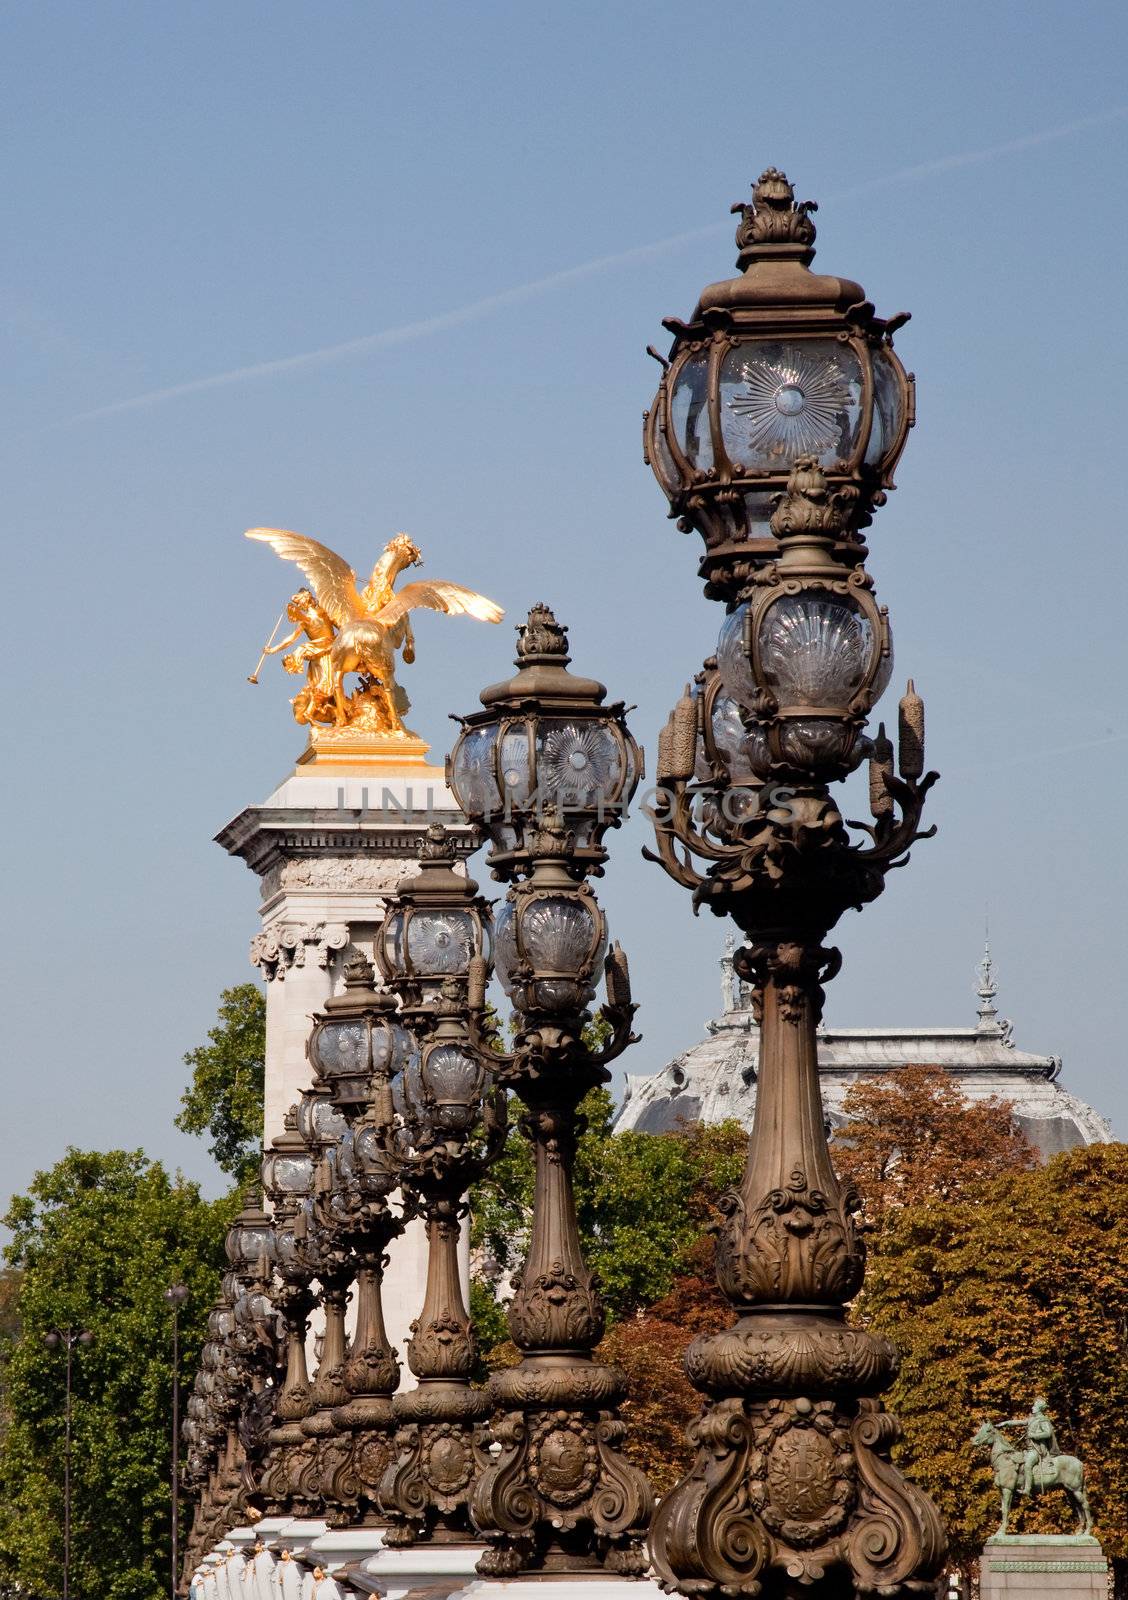 The ornate lampposts on the Pont Alexandre III lead towards one of the golden statues on the bridge